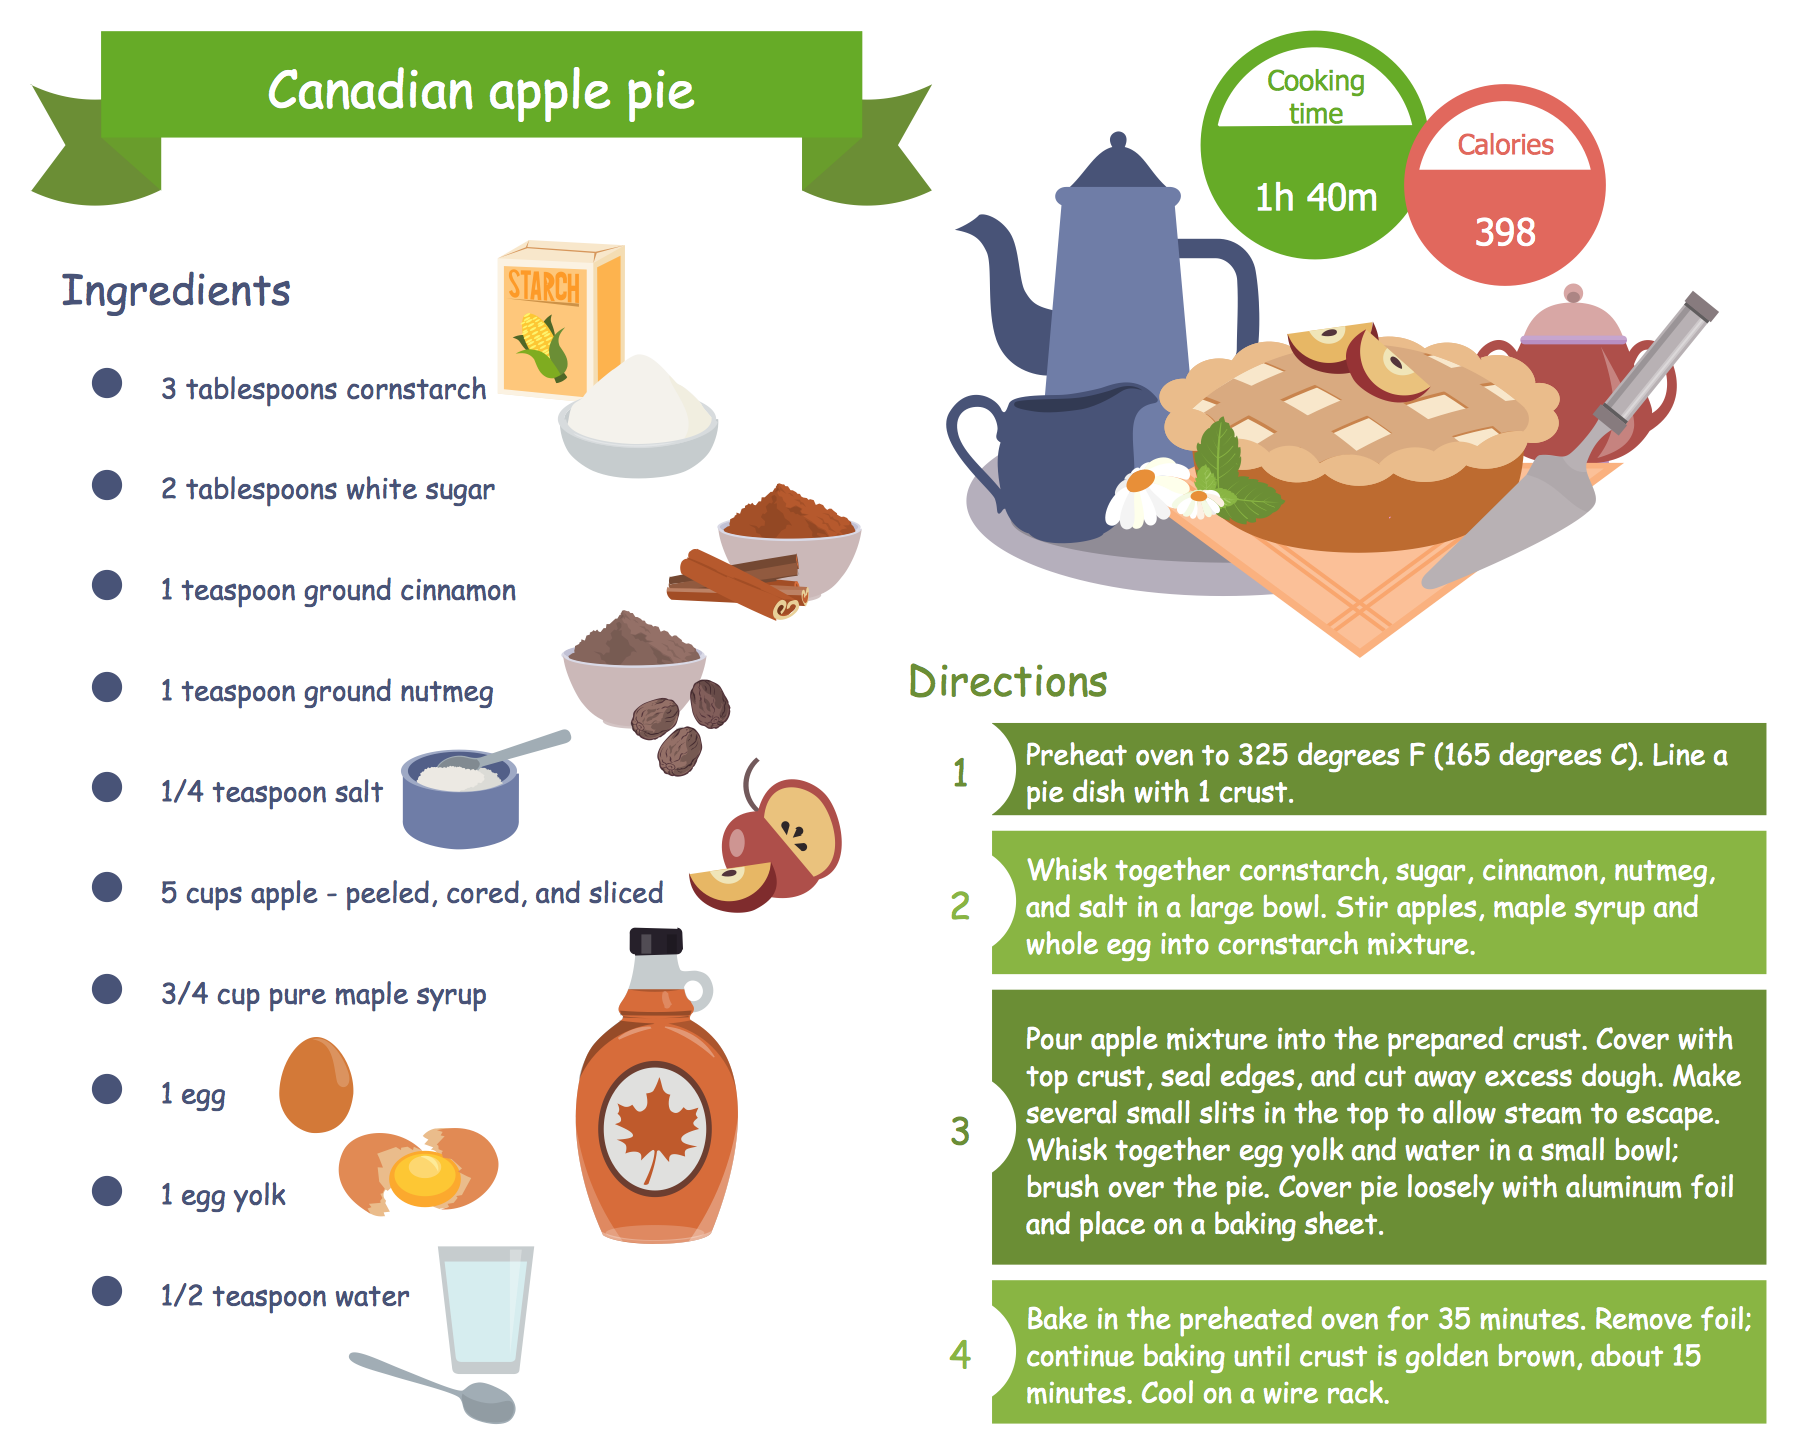 https://www.conceptdraw.com/solution-park/resource/images/solutions/food-cooking-recipes/Food-and-Beverage-Cooking-Recipes-Canadian-Apple-Pie-Recipe.png